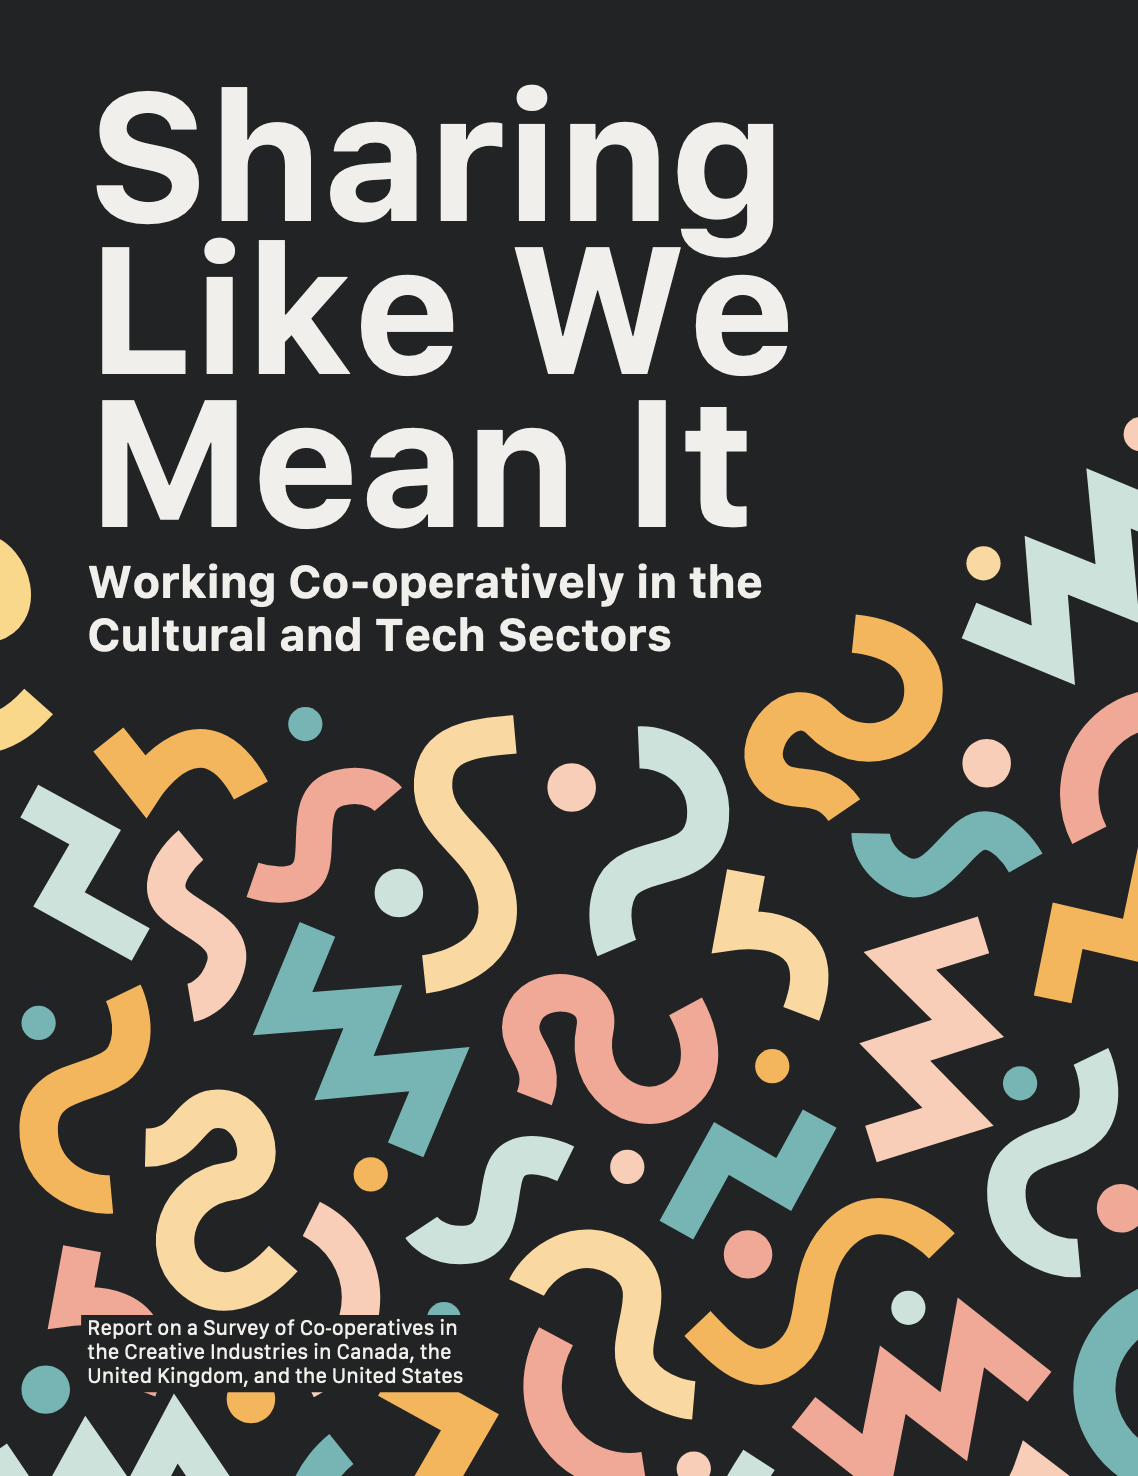 Sharing Like We Mean It: Working Co-operatively in the Cultural and Tech Sectors